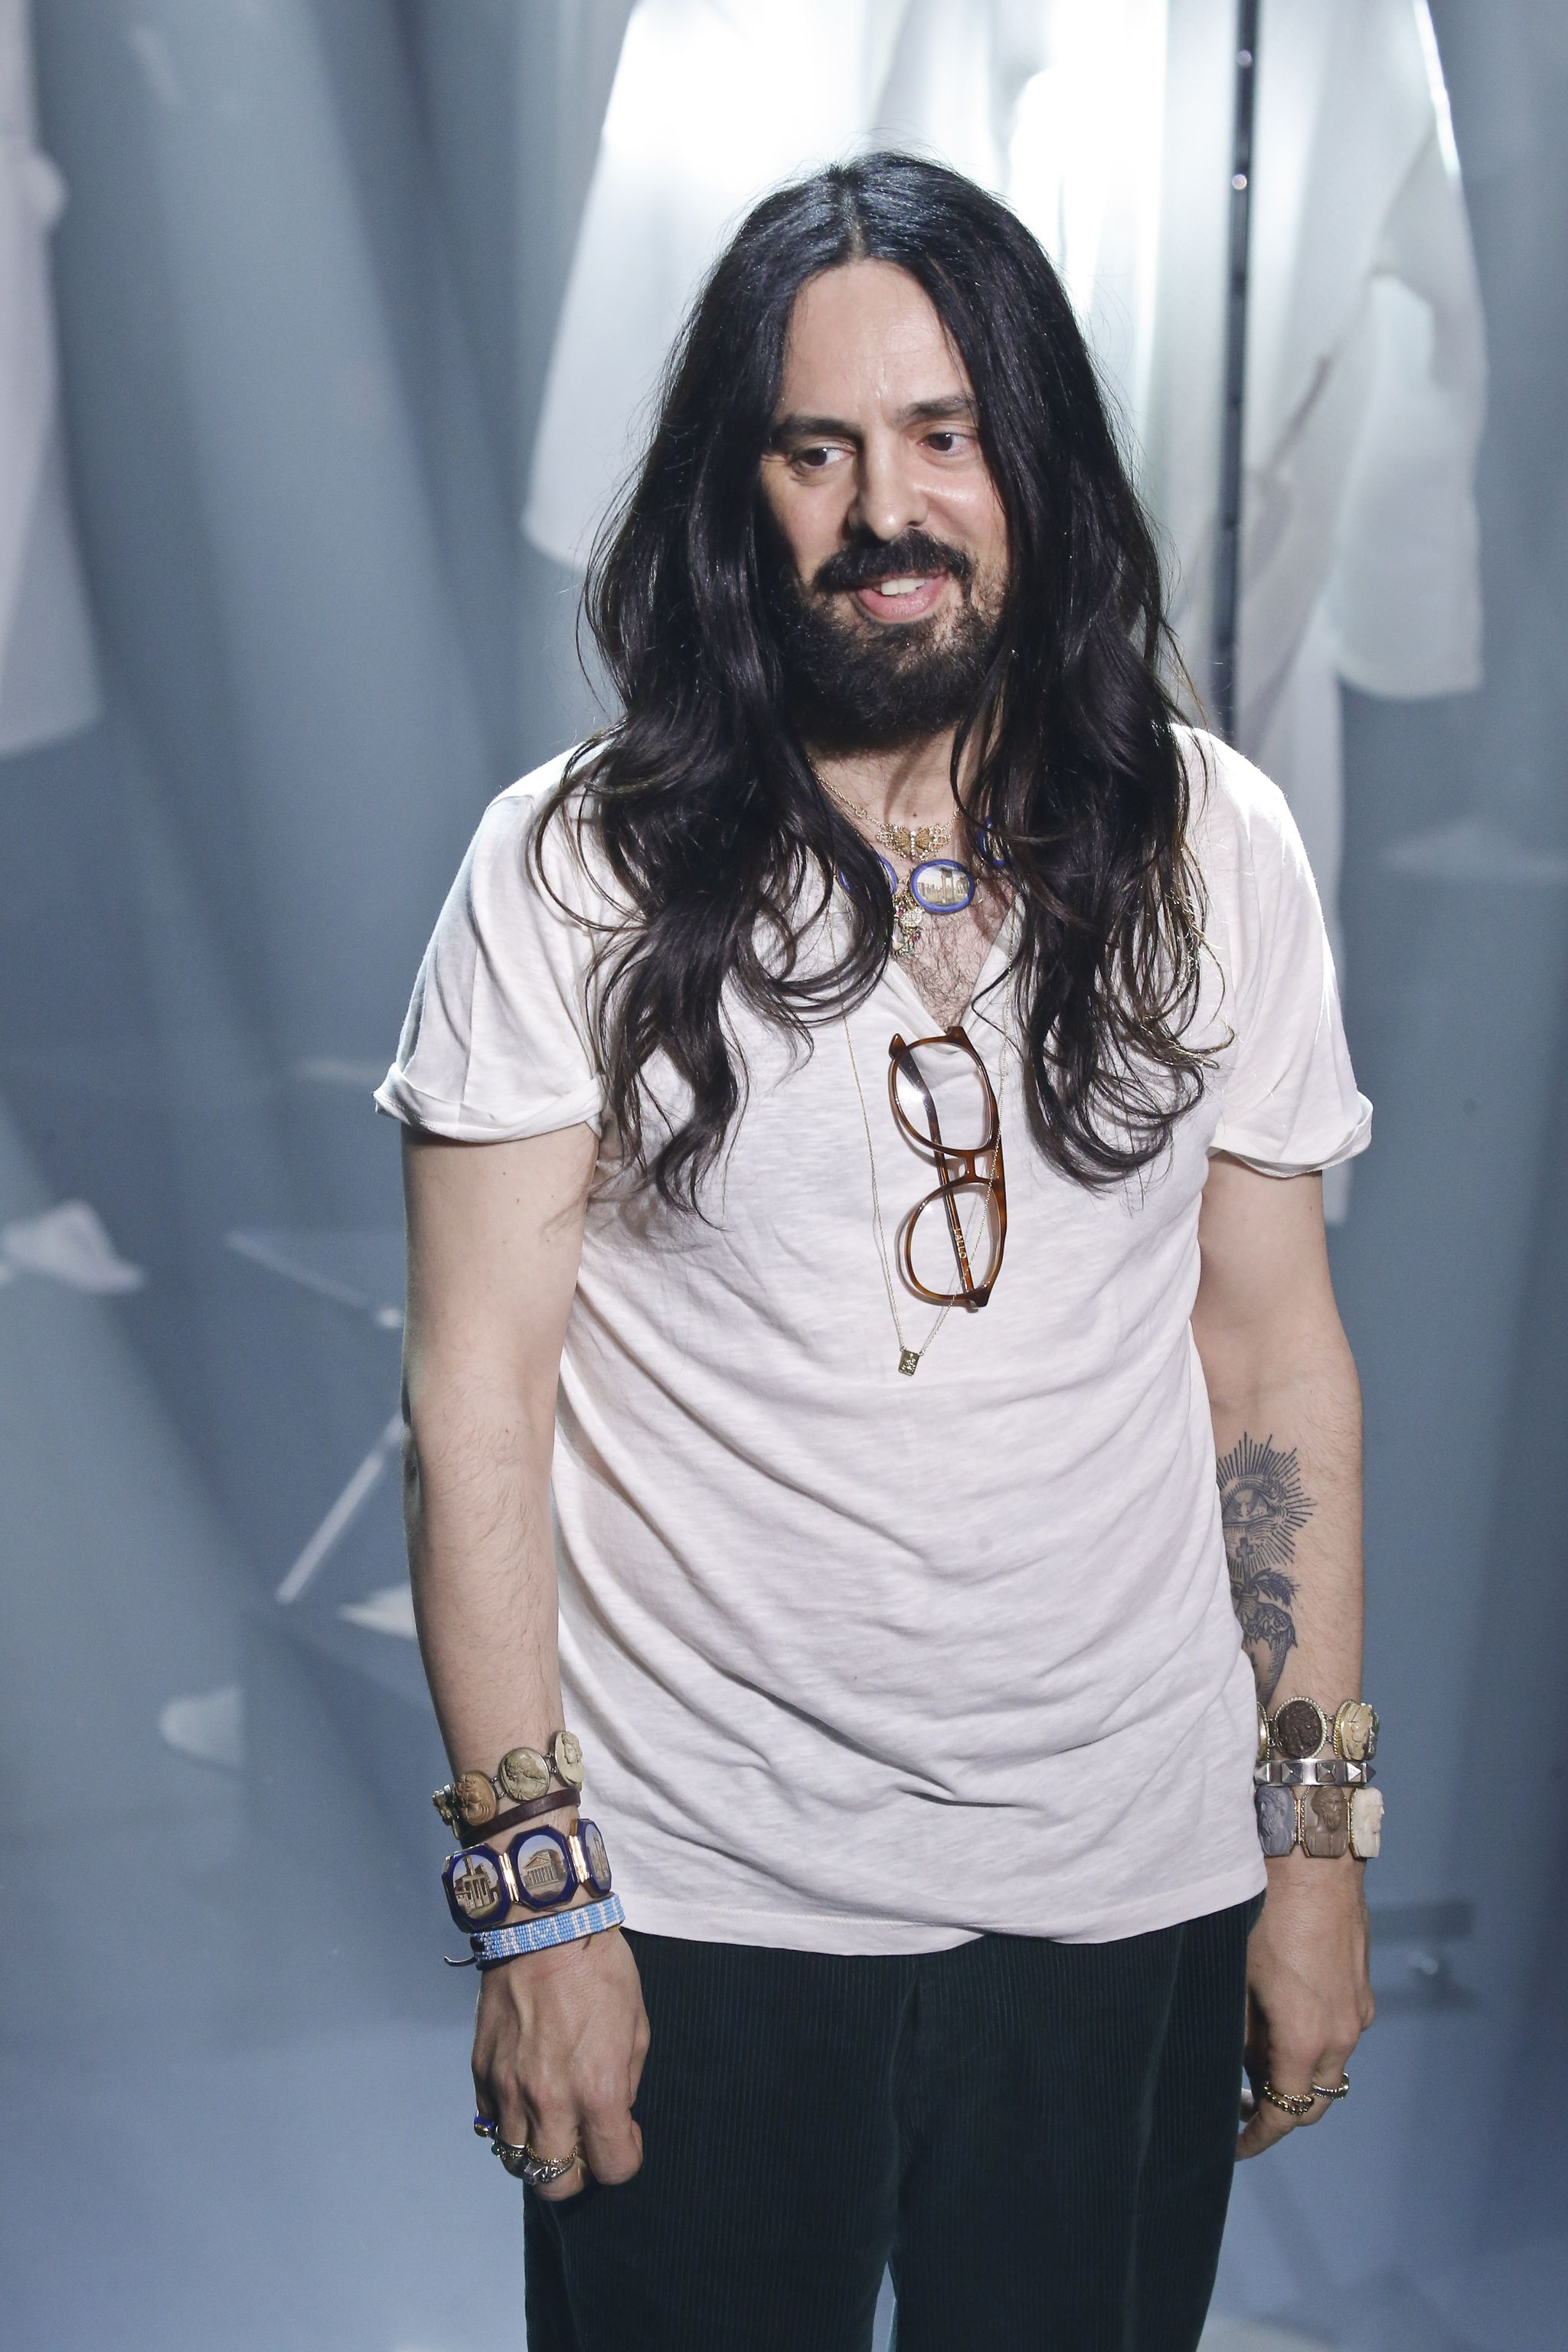 milan, italy   february 19 fashion designer alessandro michele walks the runway at the gucci ready to wear fallwinter 2020 2021 fashion show during milan fashion week on february 19, 2020 in milan, italy photo by victor virgilegamma rapho via getty images